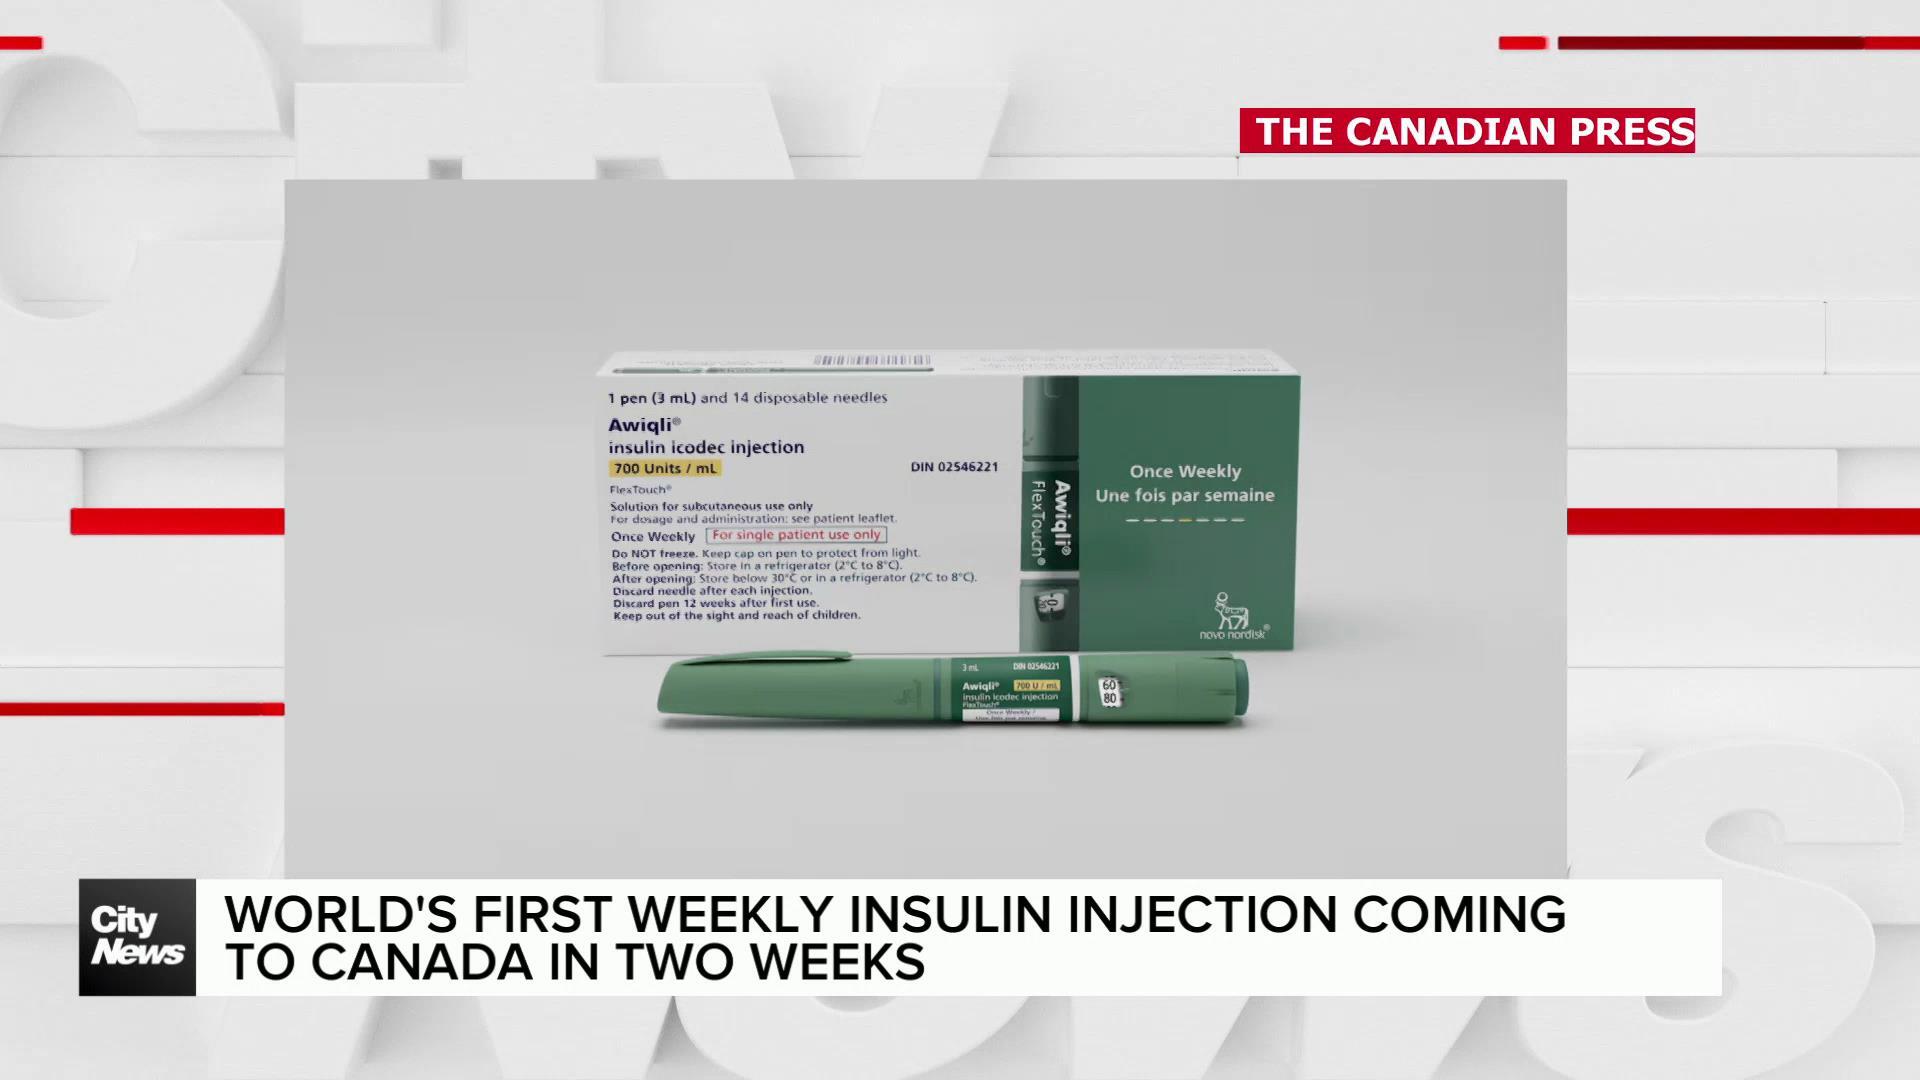 World's first weekly insulin injection coming to Canada in 2 weeks